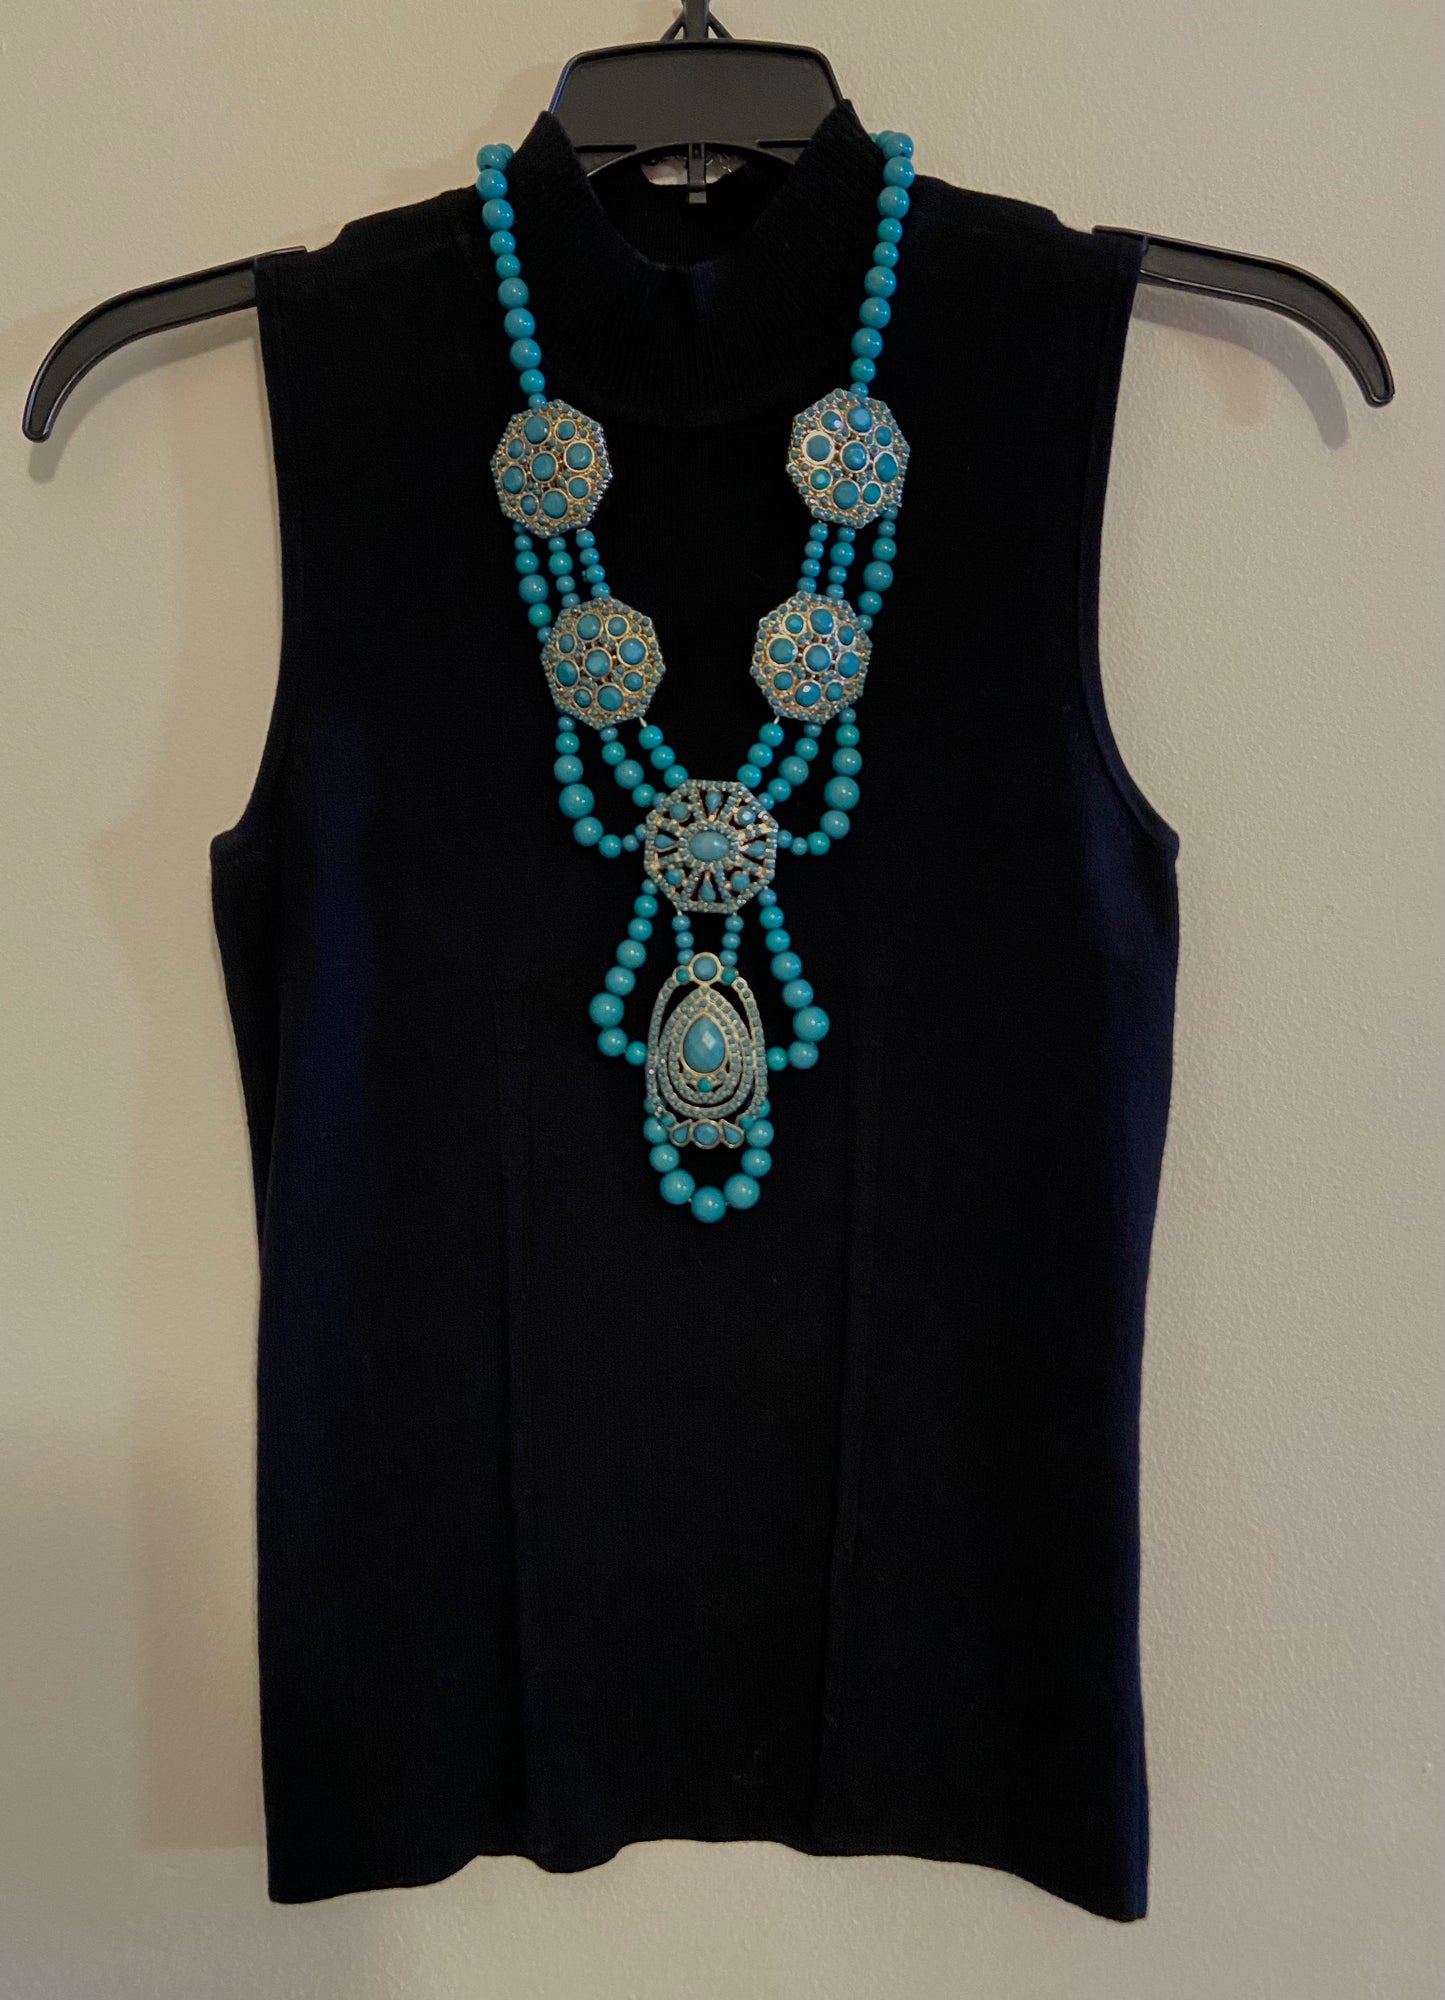 Stunning Teal & Gold Necklace